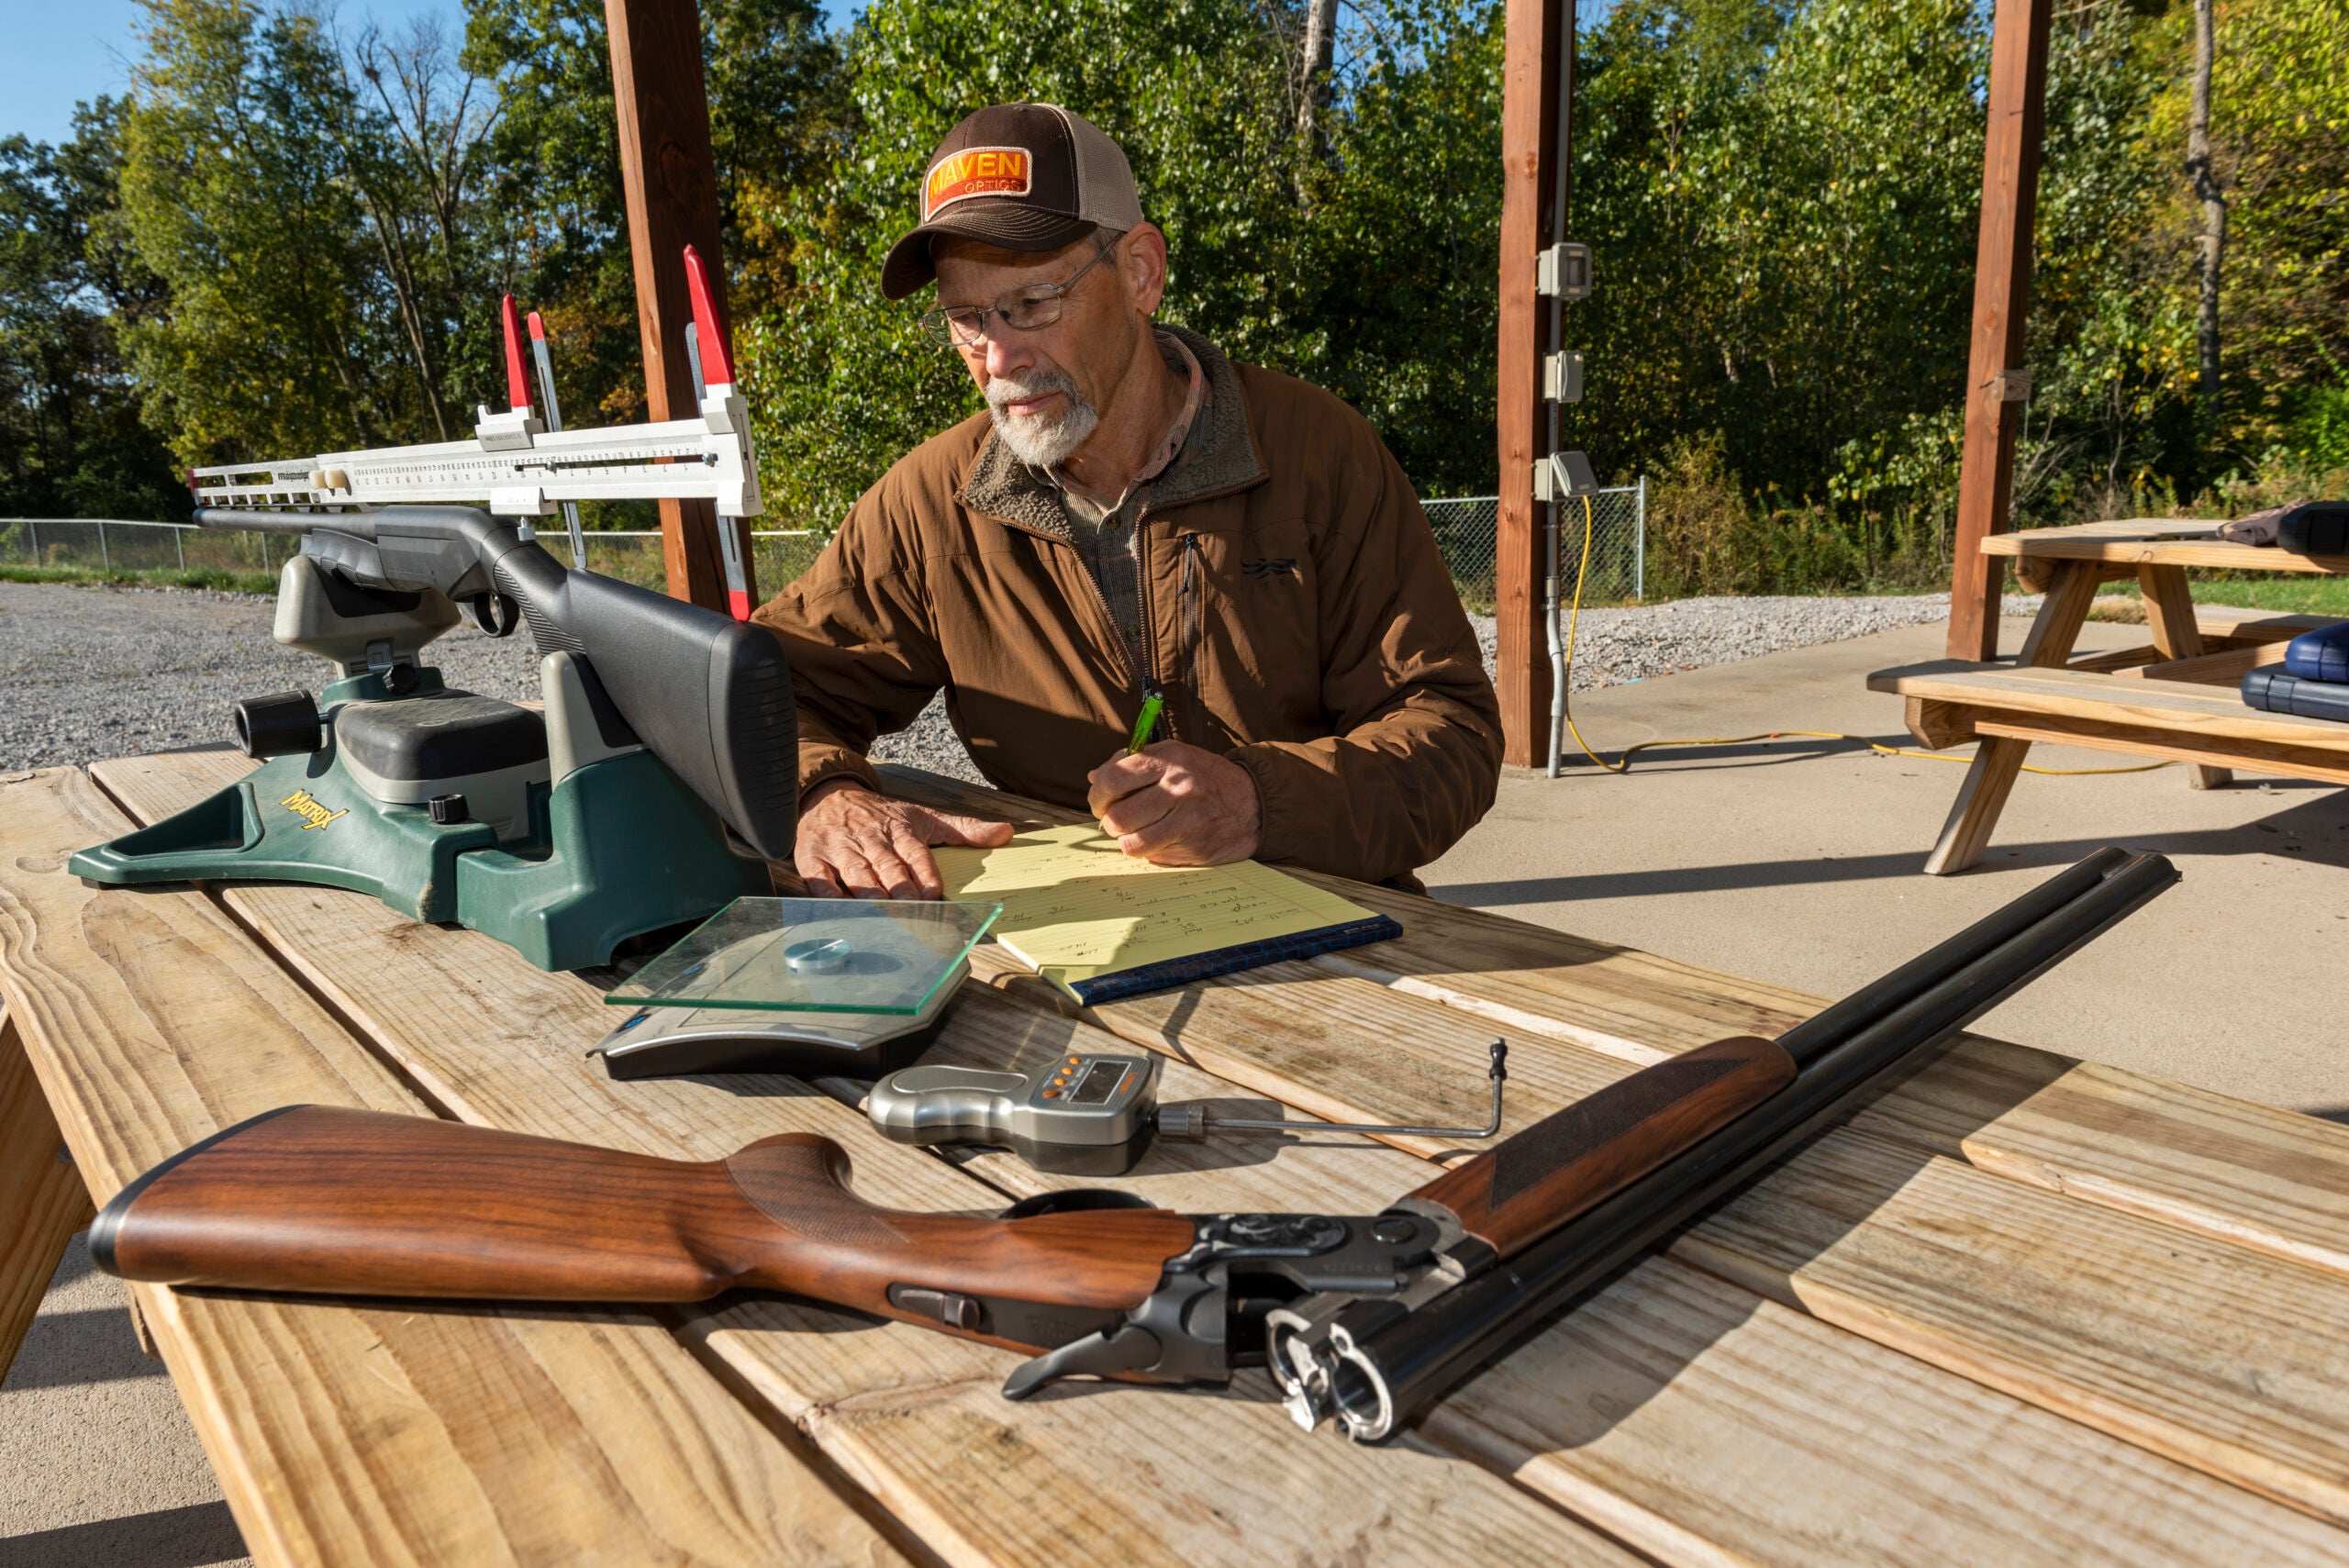 Field & Stream shotguns editor sits at ta table, taking evaluation notes on two test shotguns.